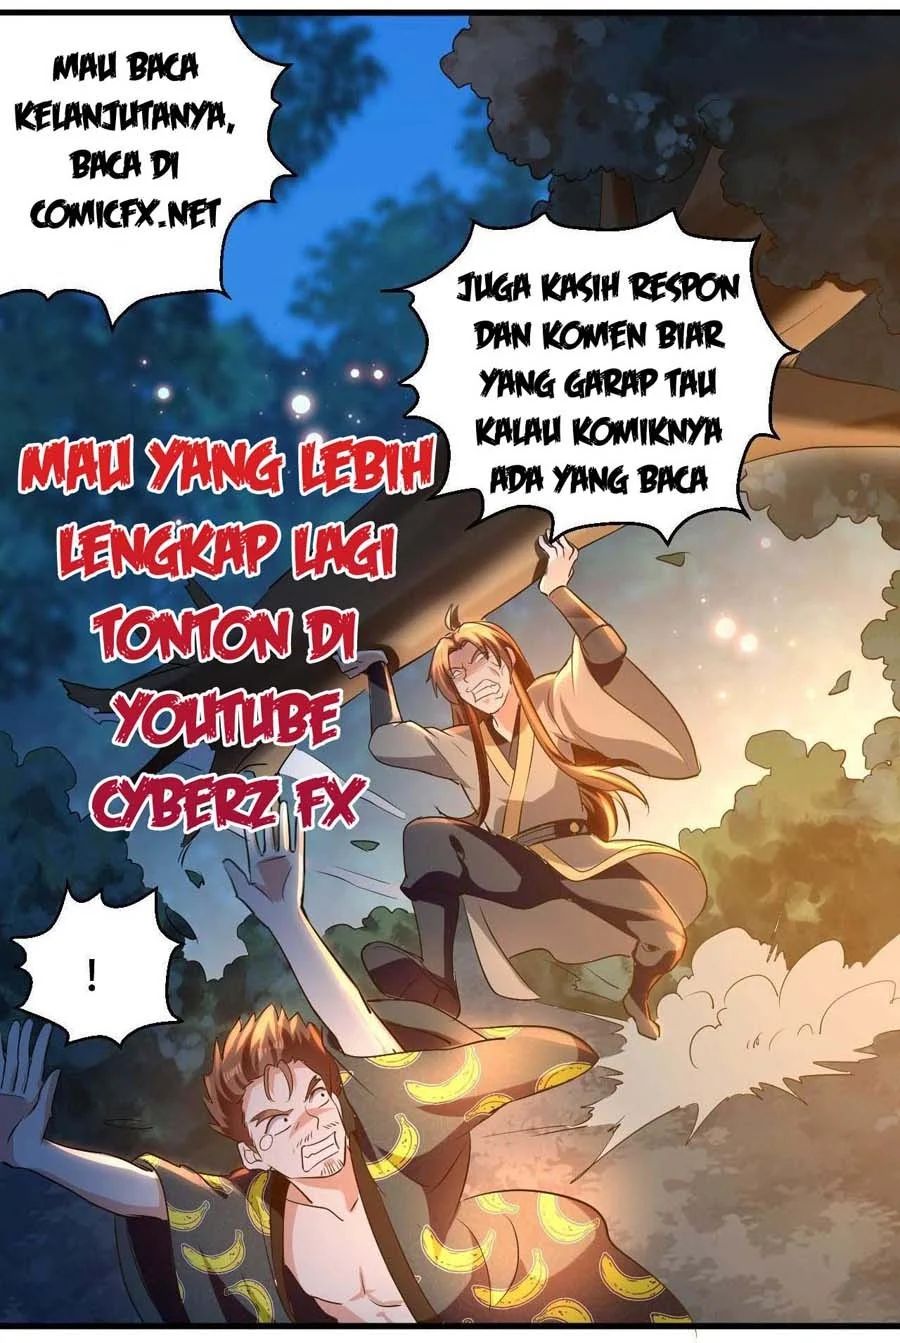 The Nine Heaven of Martial Arts Chapter 130